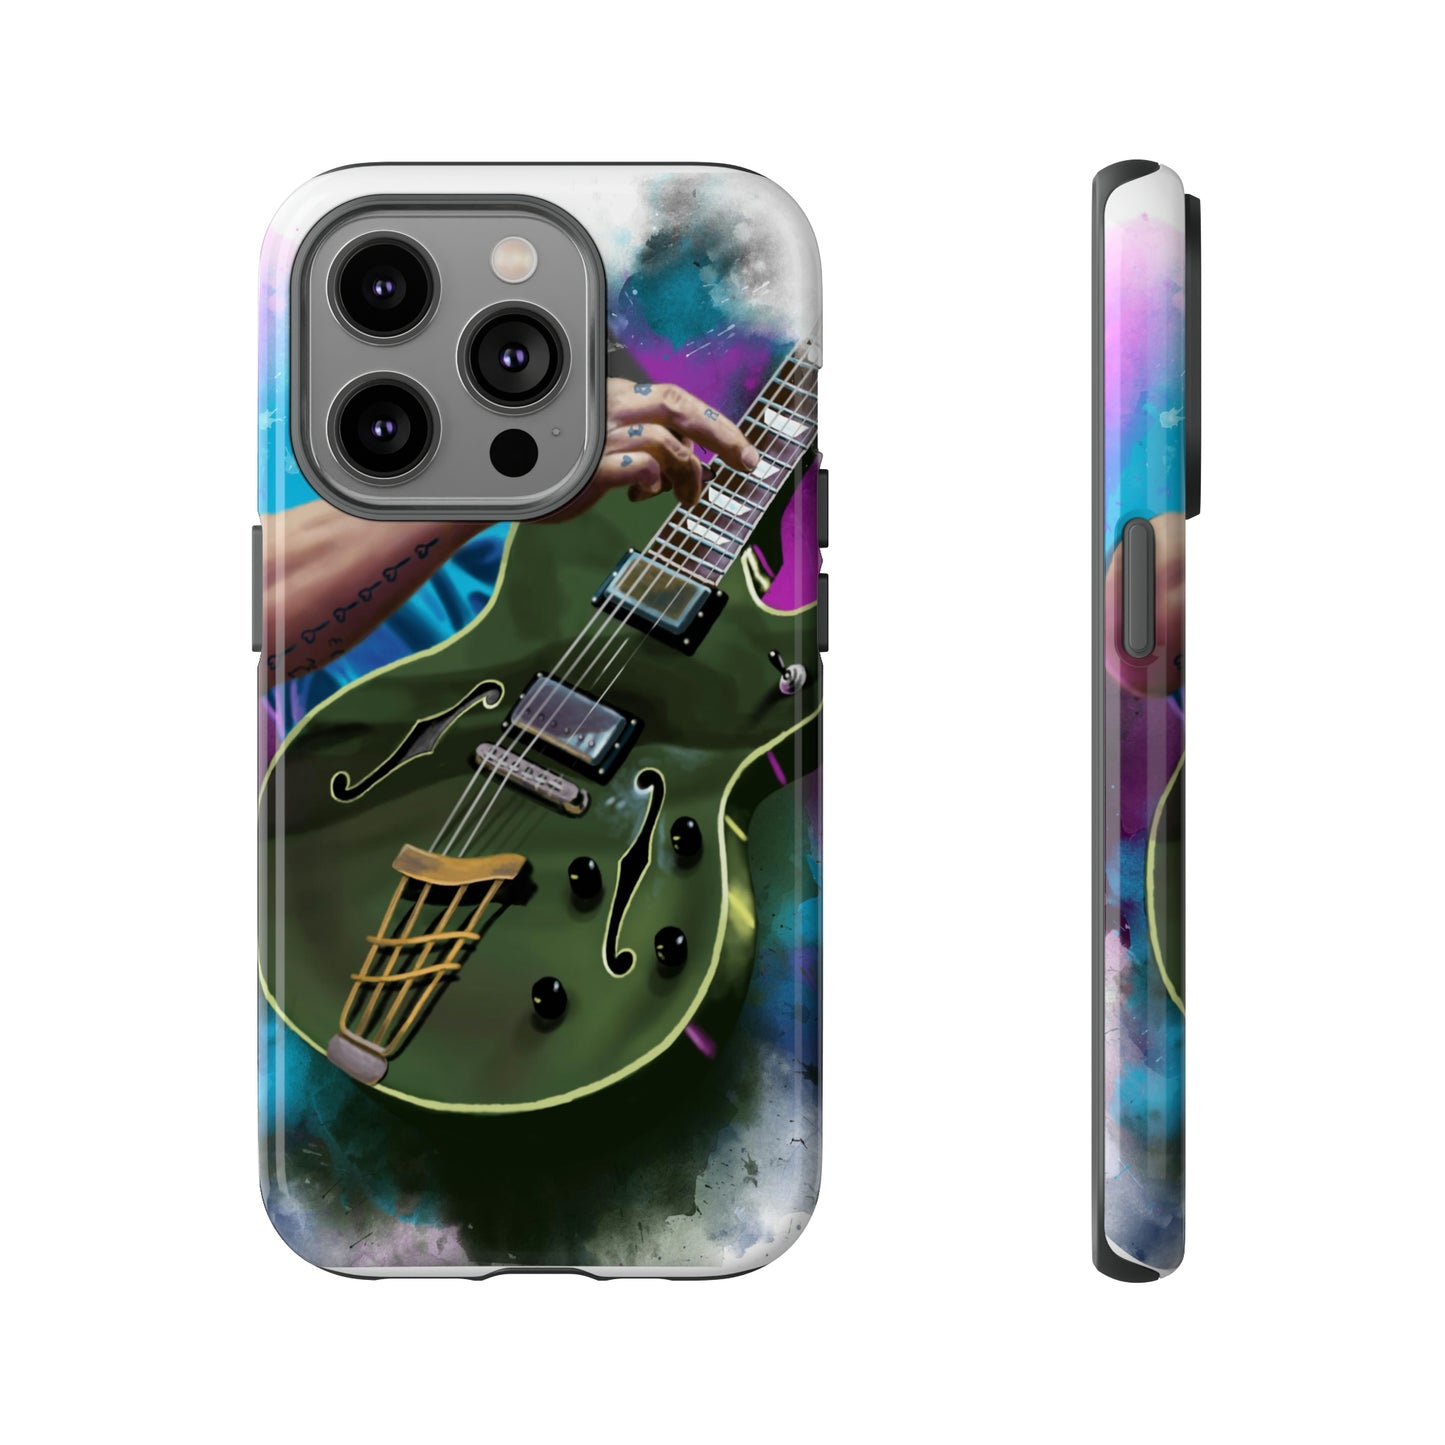 Digital painting of an olive green electric guitar with hand printed on iphone tough case